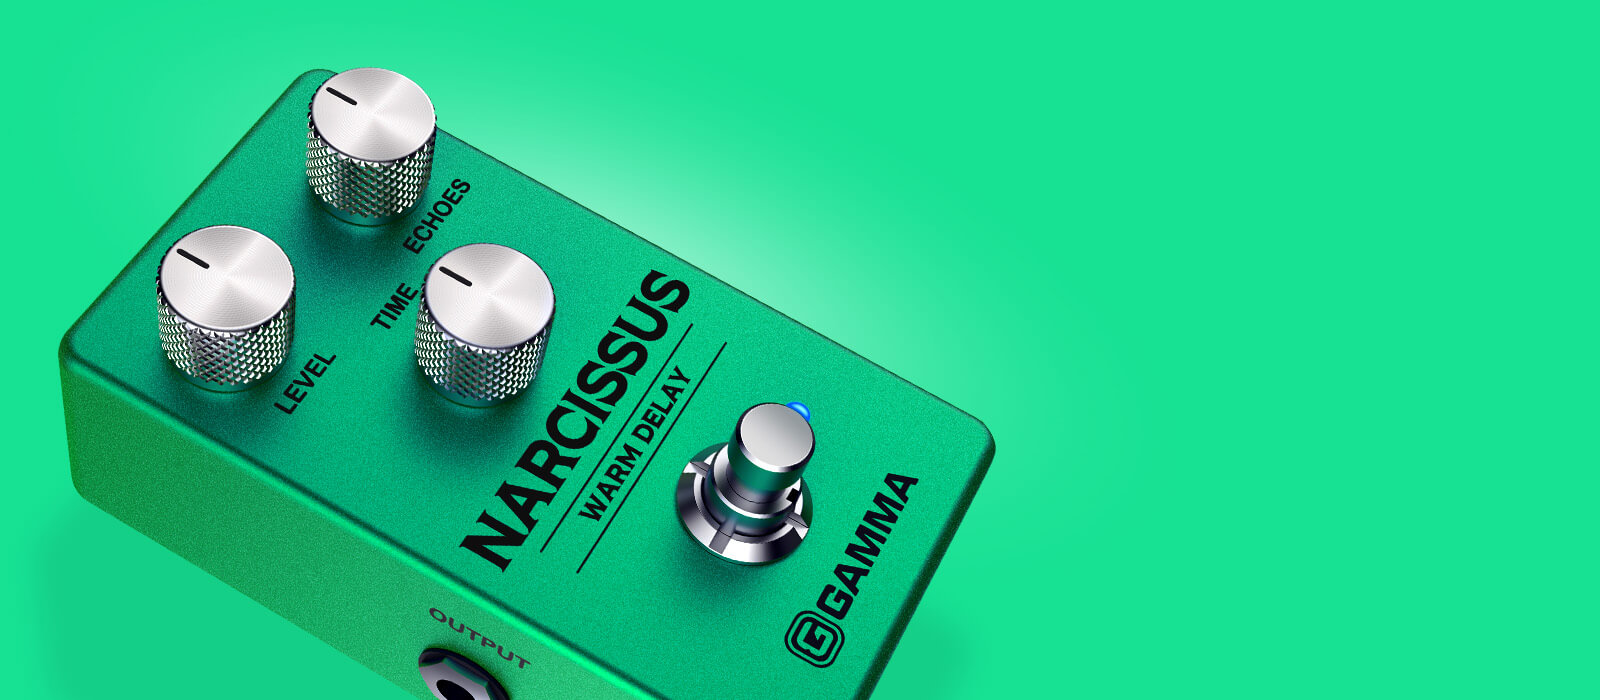 Gamma Narcissus warm delay pedal floating on green background.